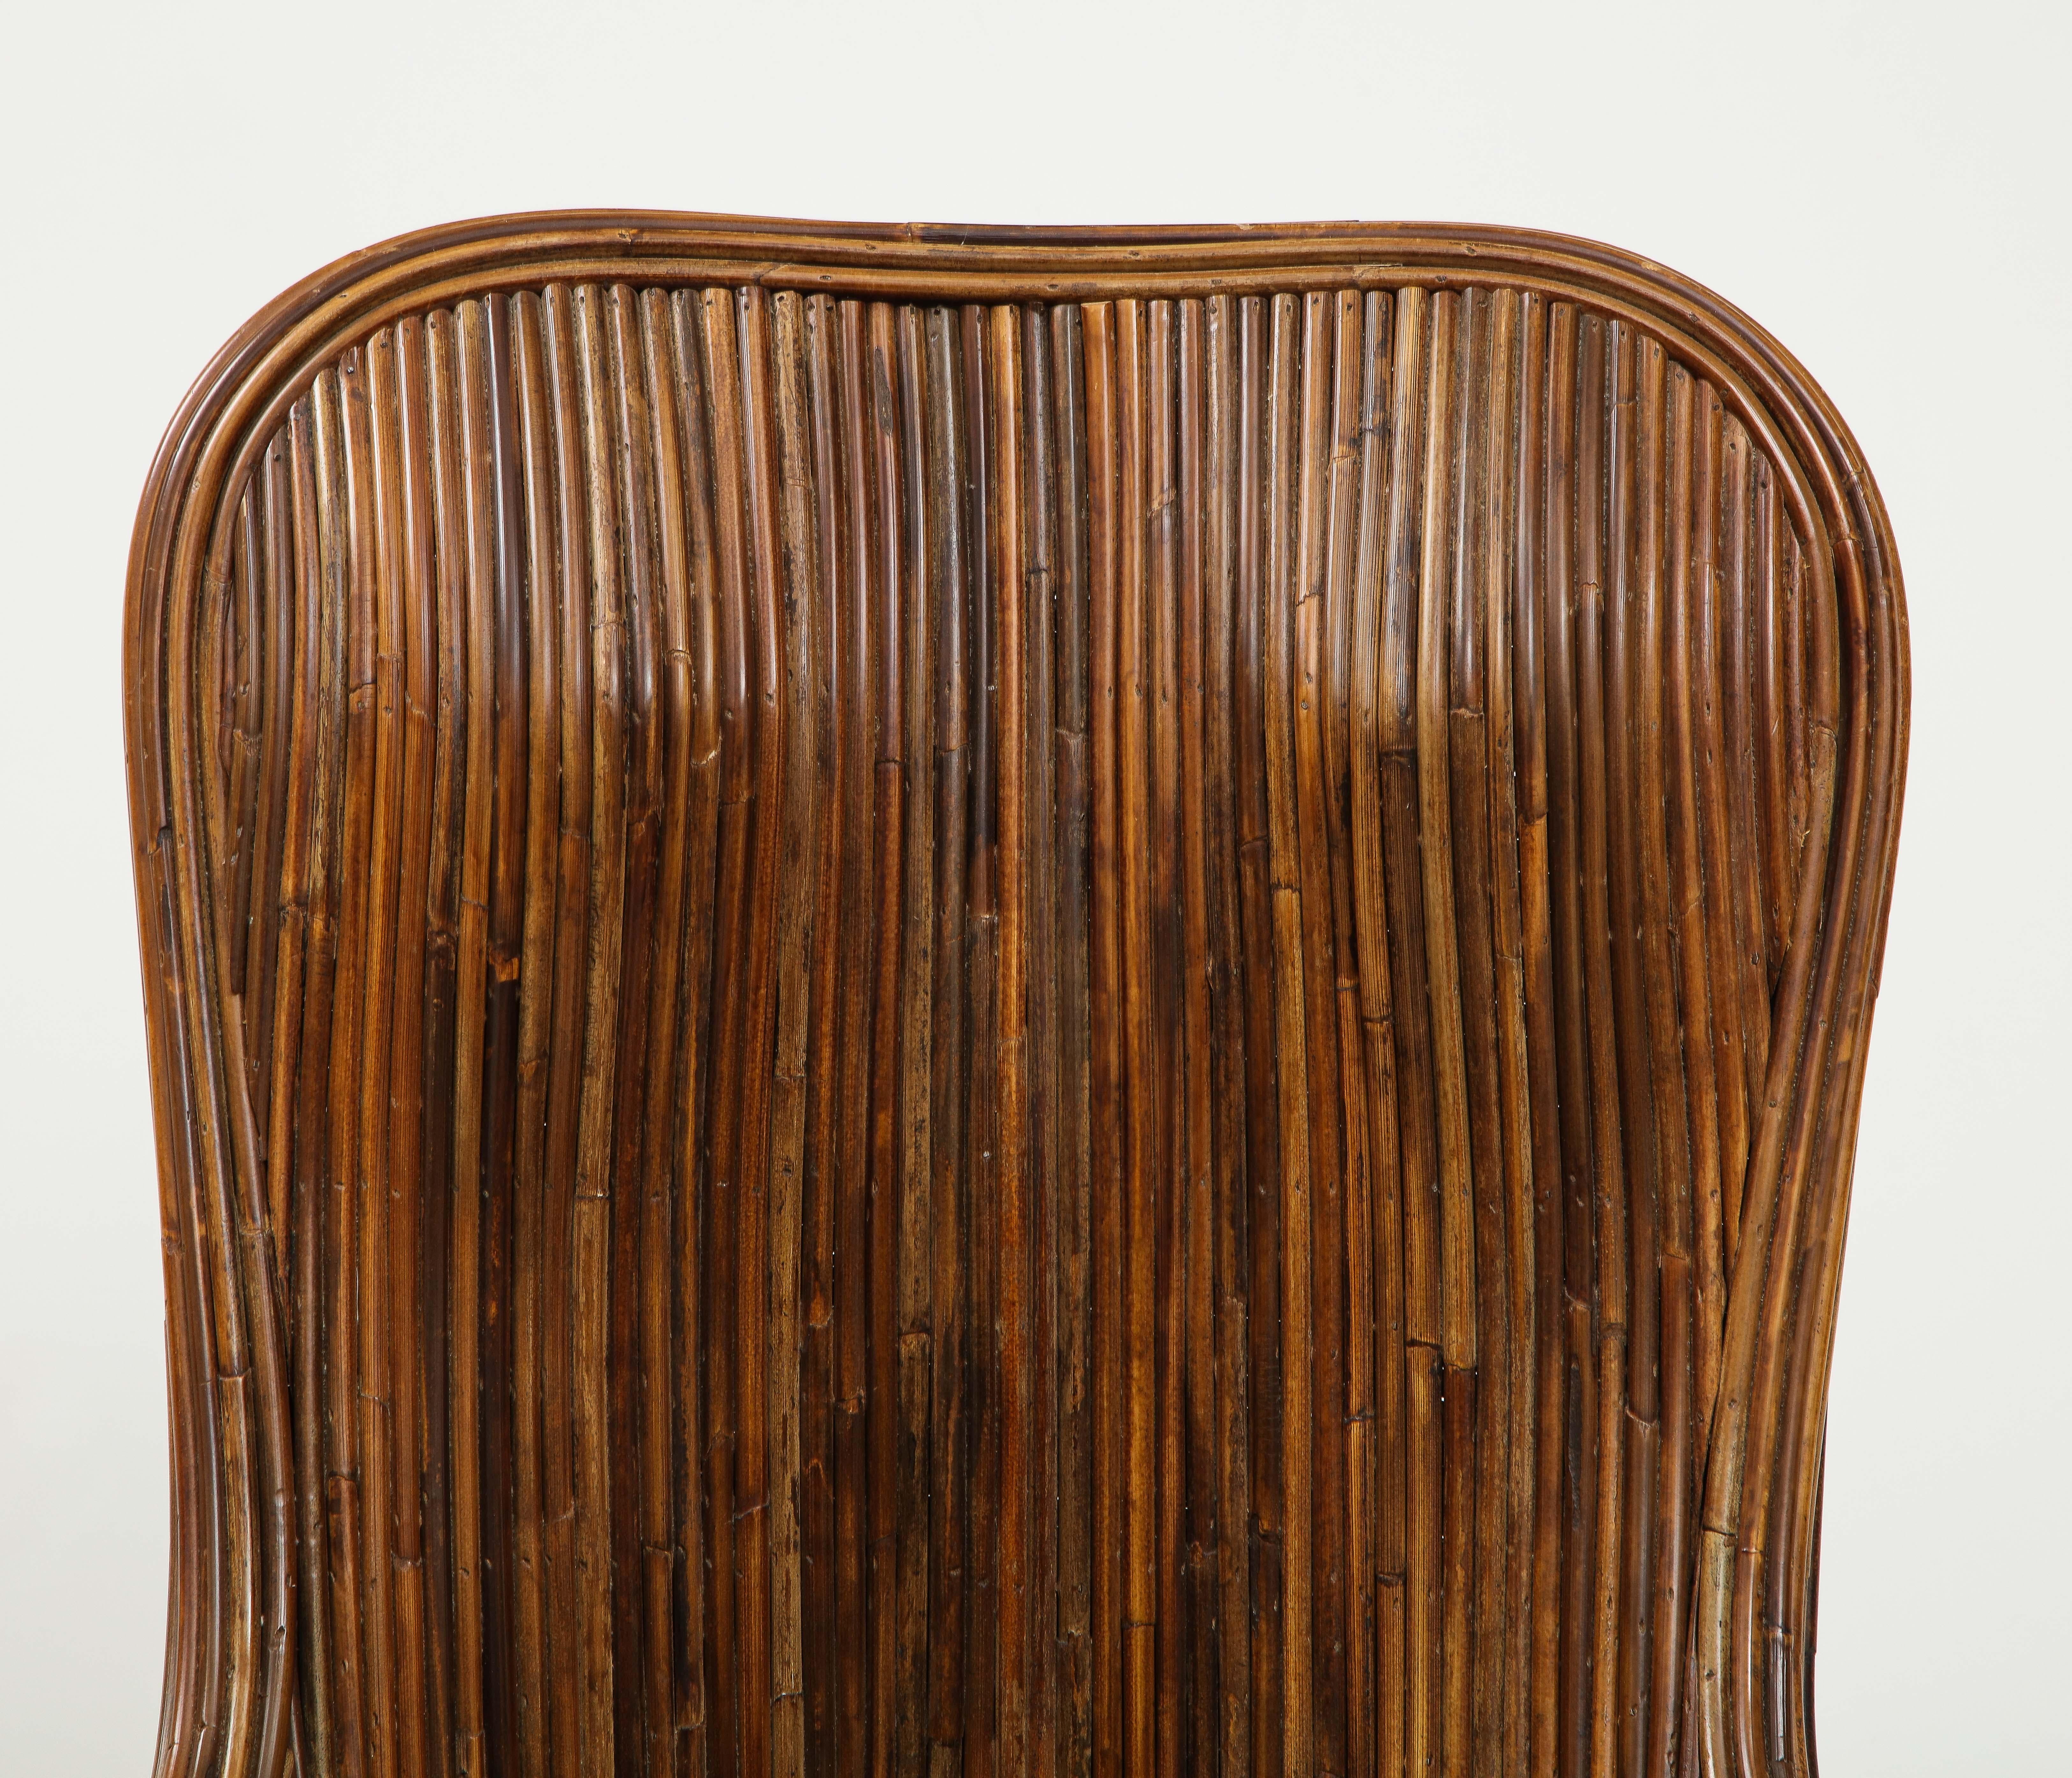 Hand-Crafted Sculptural Bamboo or Rattan Accent Lounge Chair, Italy, circa 1970